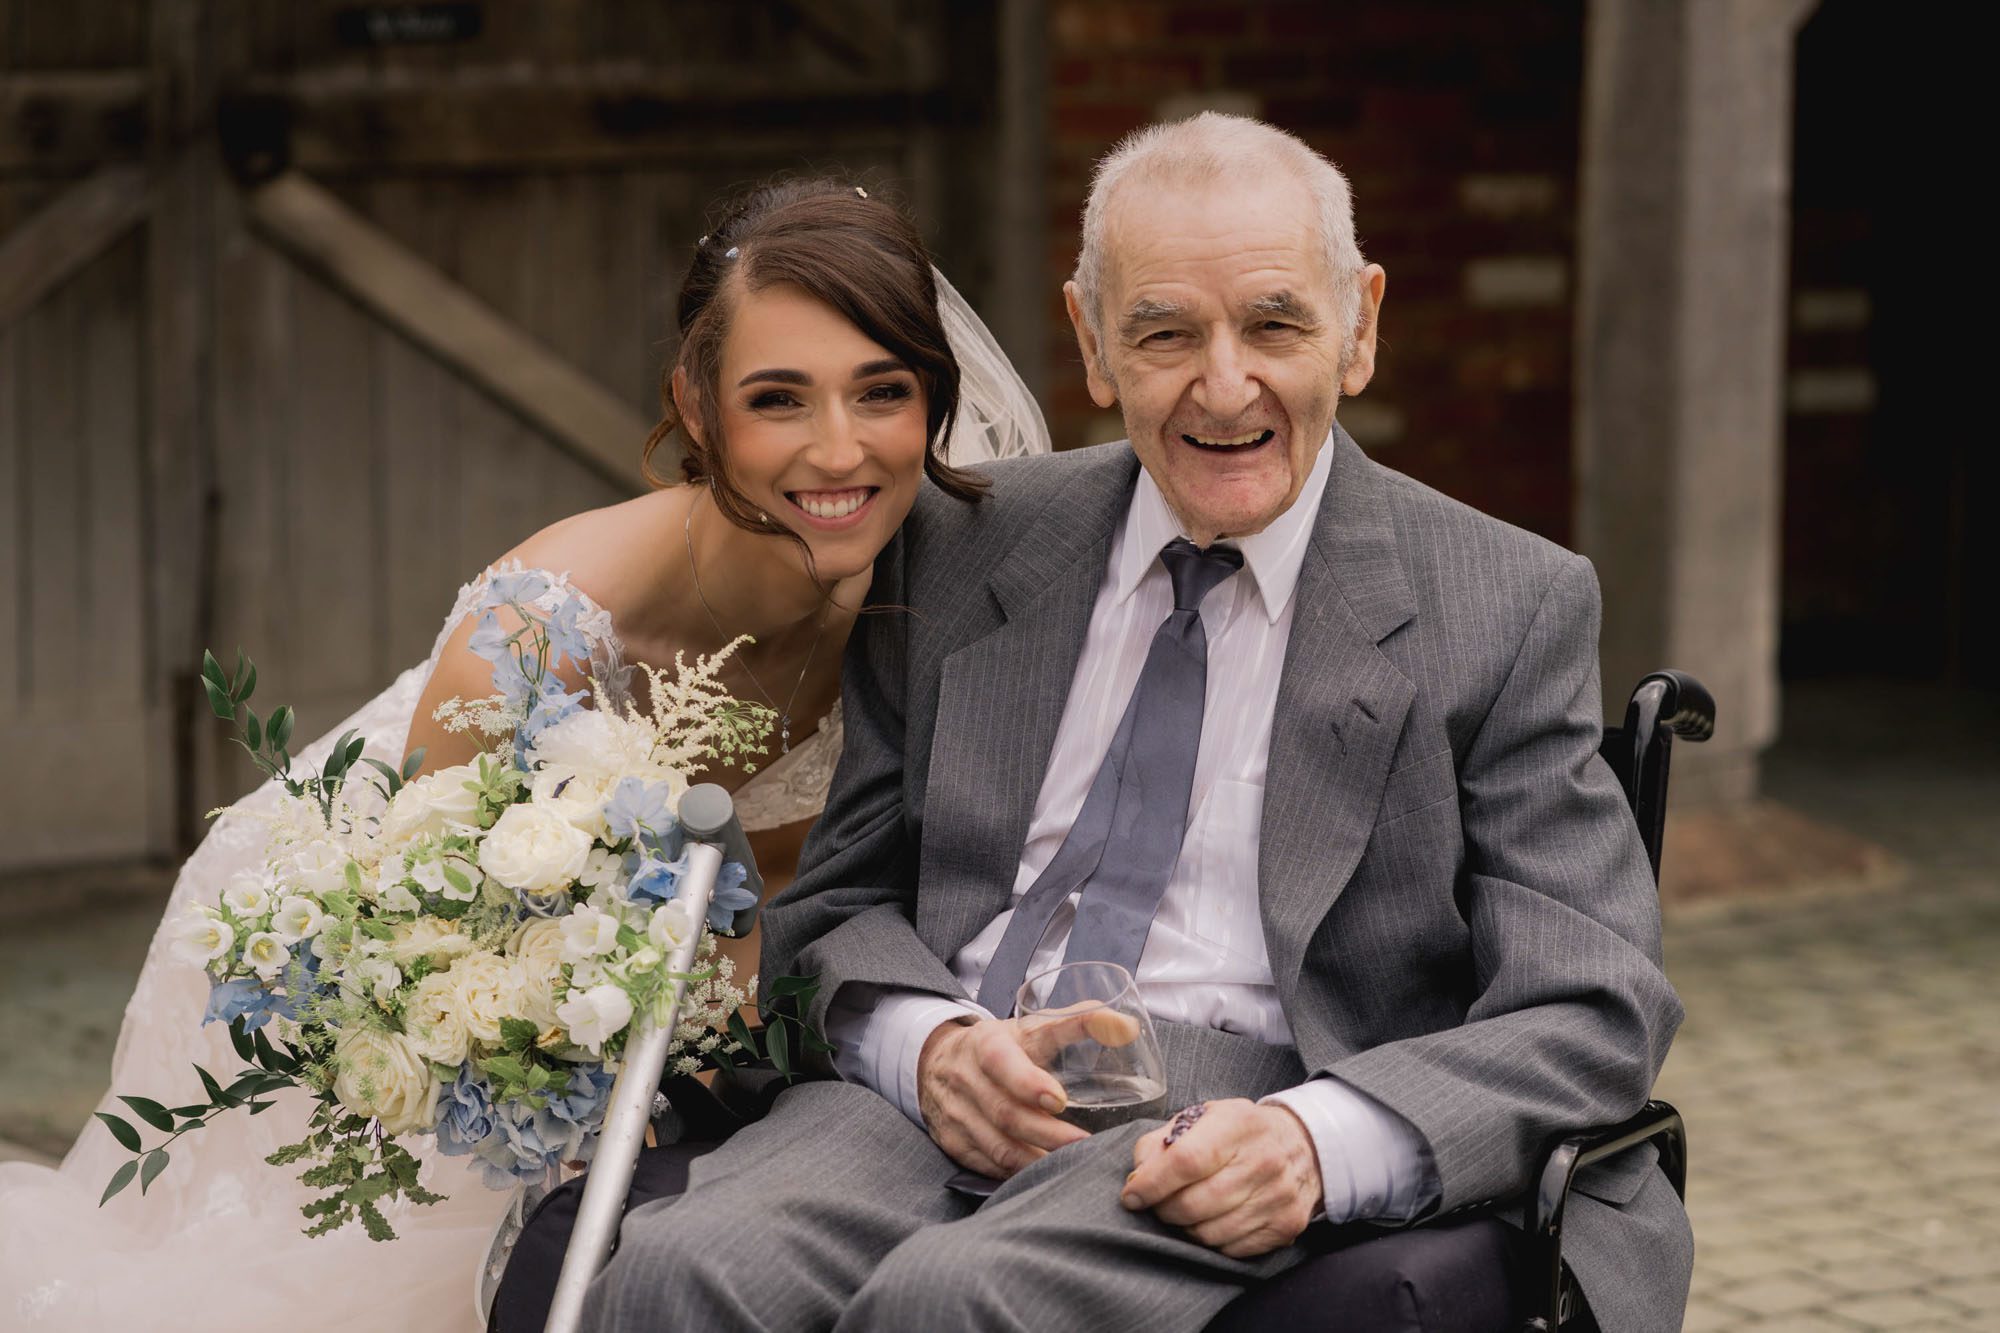 The bride with her grandfather on her wedding day at Rivervale Barn in Hampshire.